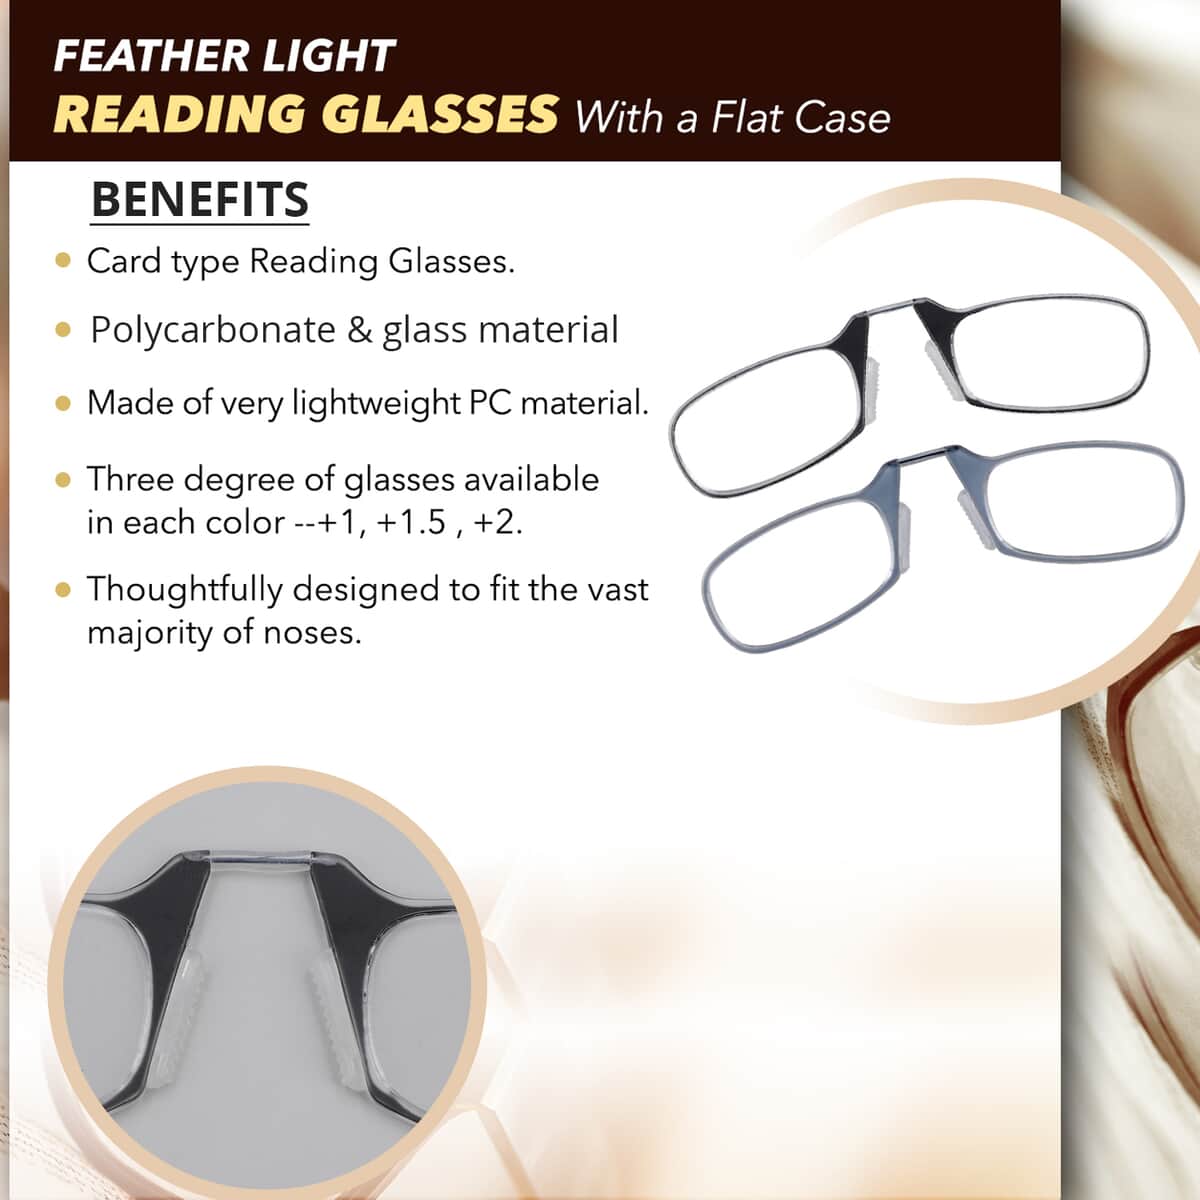 Feather Light Reading Glasses with a Flat Case - Black (Degree 1.0) image number 2